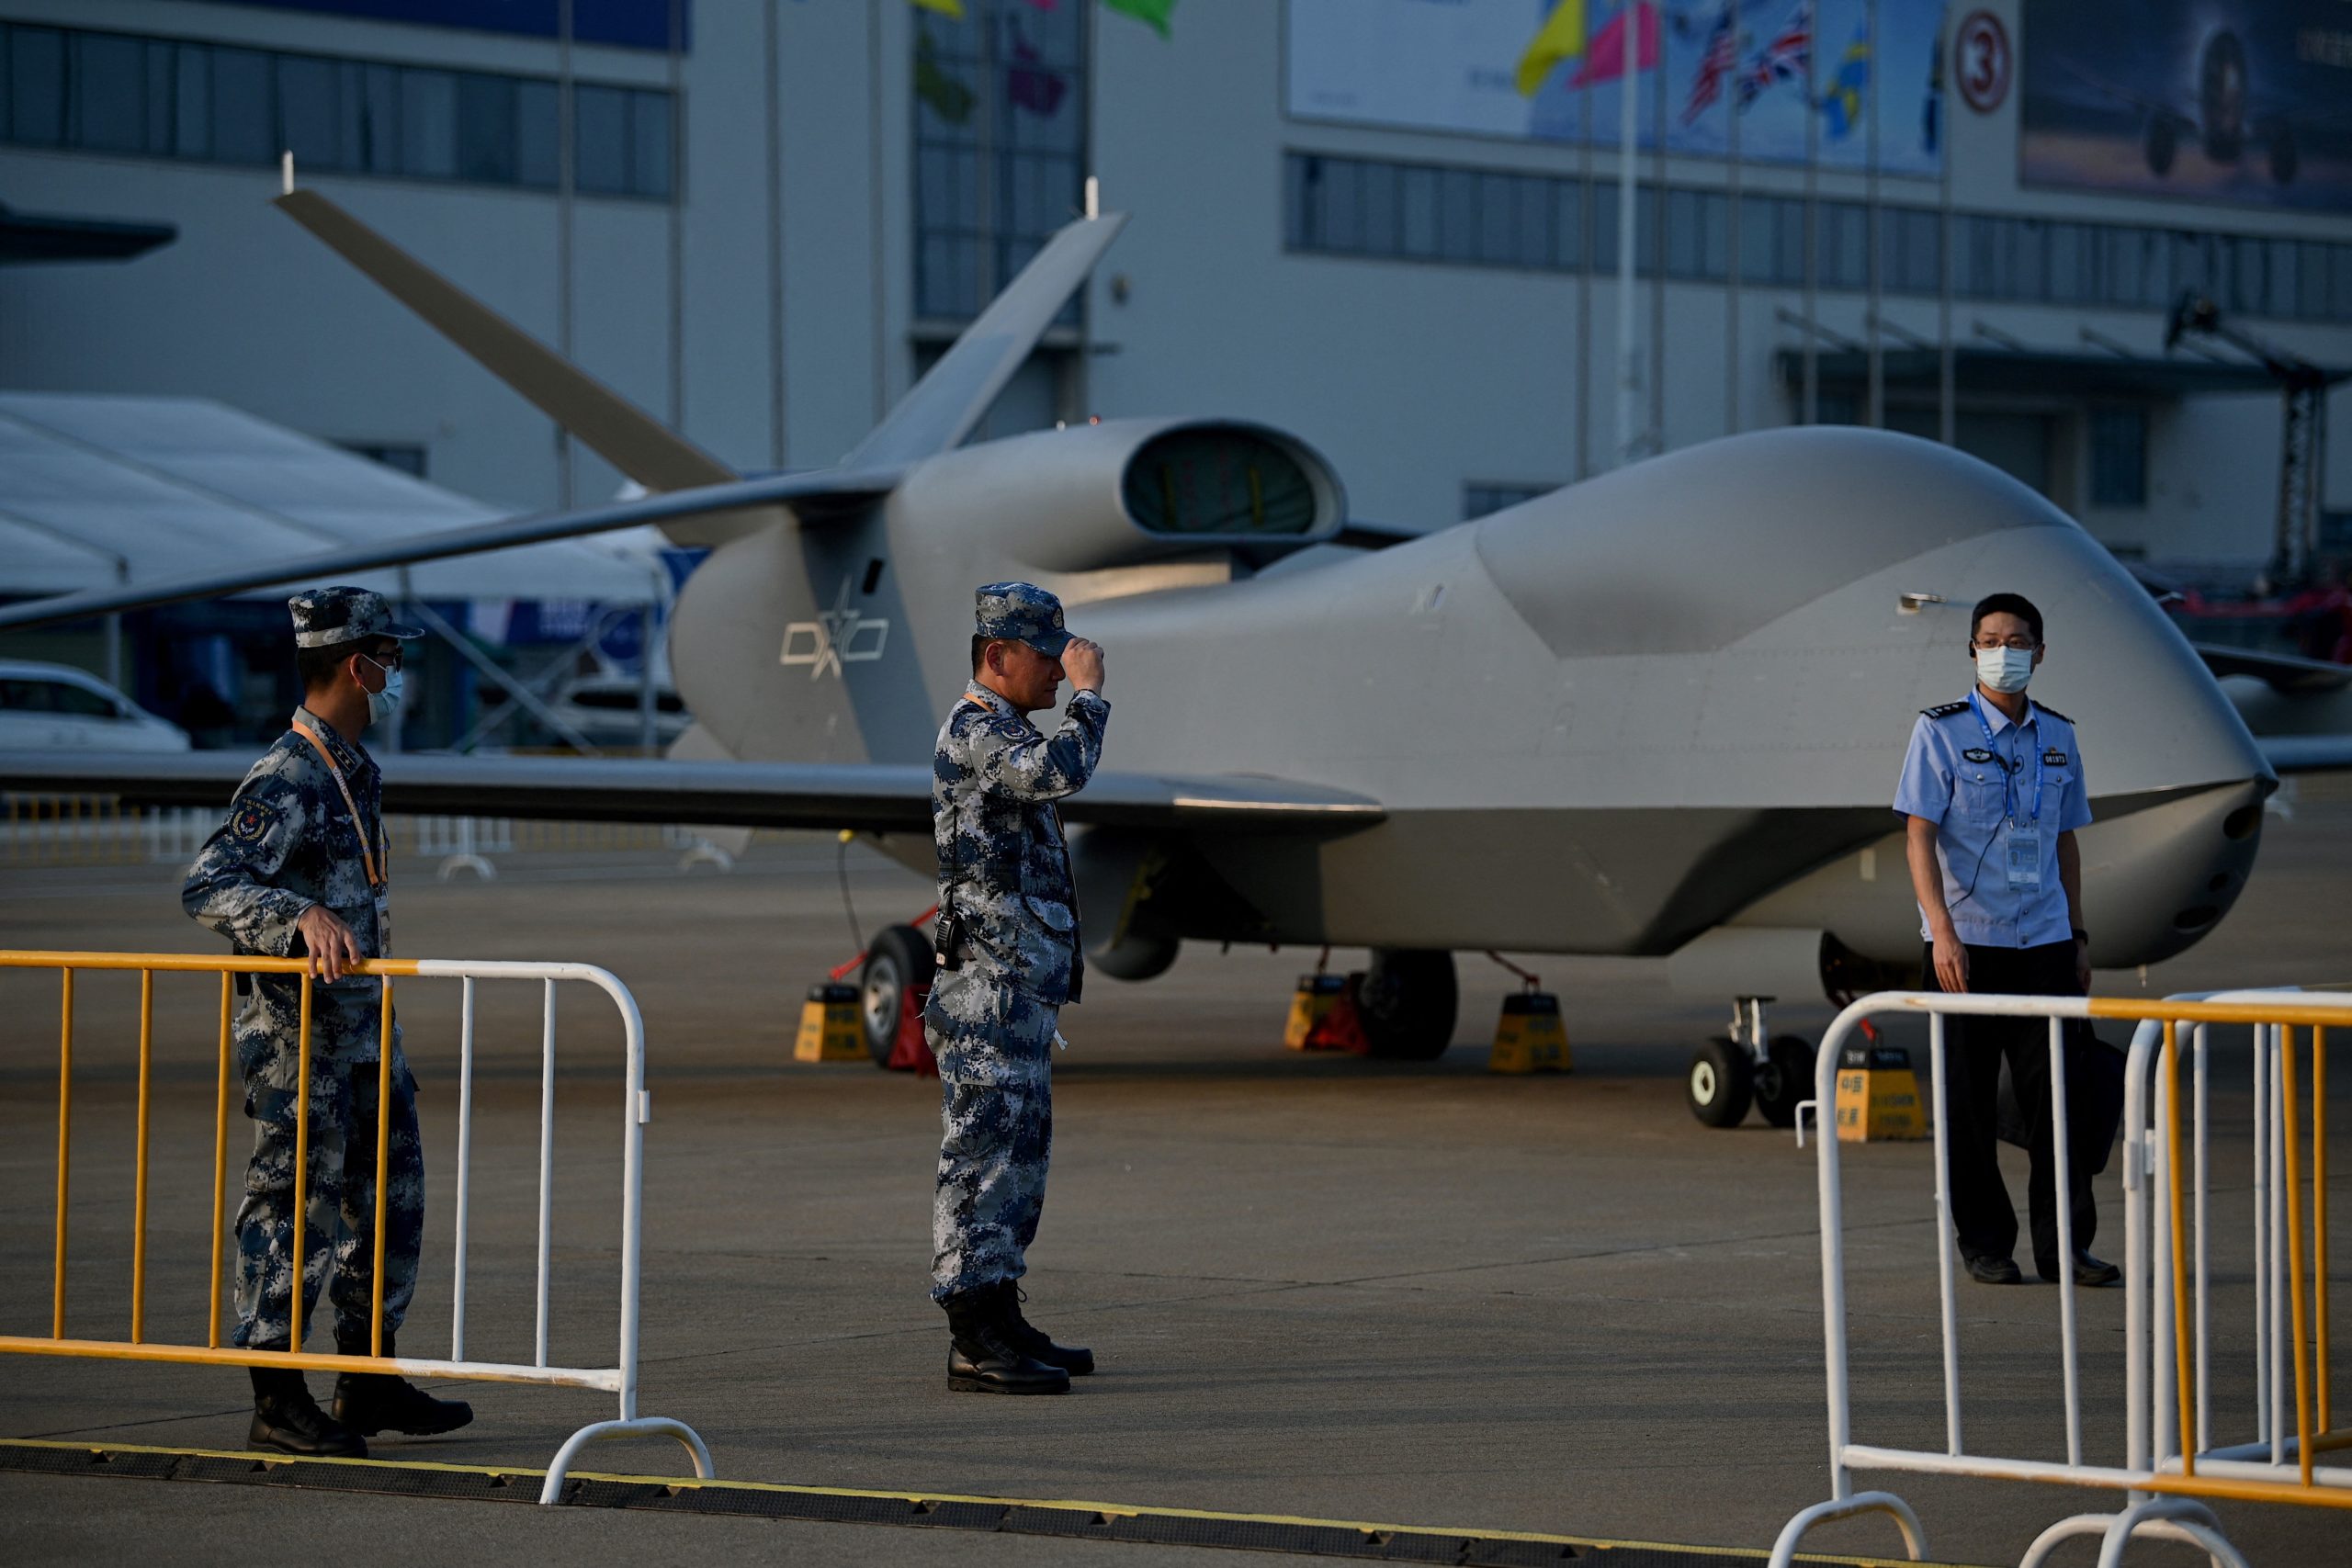 A People's Liberation Army (PLA) Air Force WZ-7 high-altitude reconnaissance drone is seen a day before the 13th China International Aviation and Aerospace Exhibition in Zhuhai in southern China's Guangdong province on September 27, 2021. (Photo by Noel Celis / AFP)